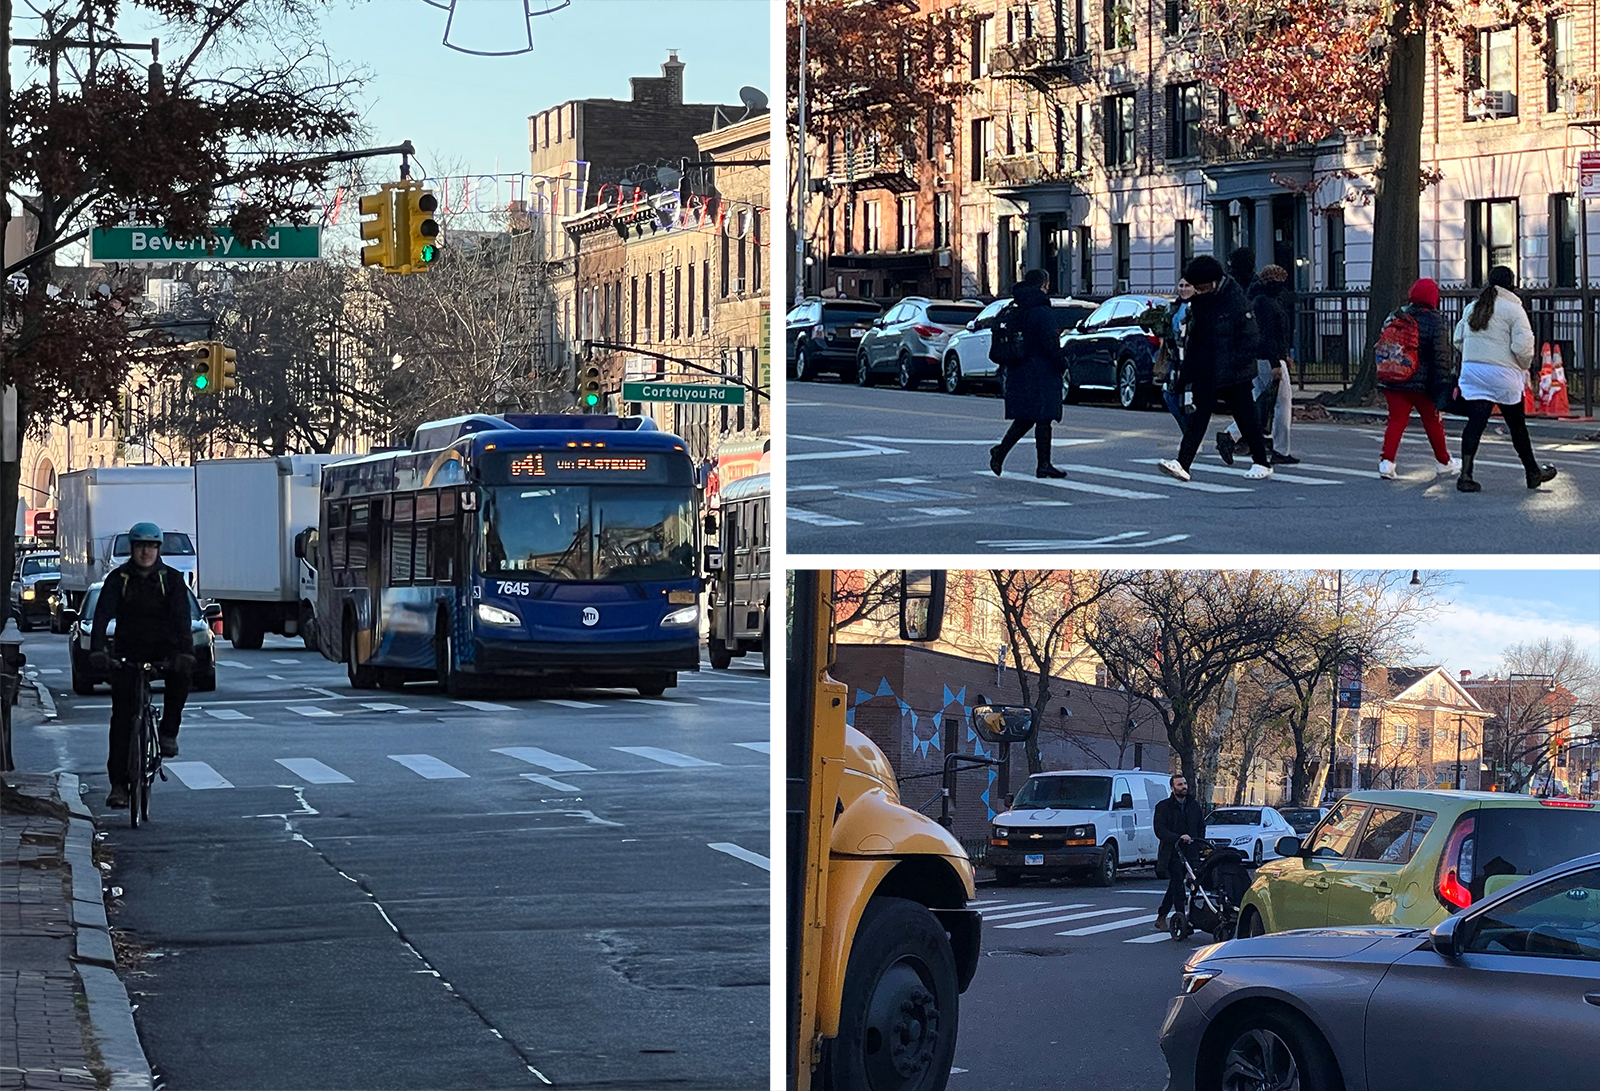 1. A bike and a bus in heavy traffic on a street full of cars and trucks. 2. Several pedestrians in a crosswalk, crossing a wide street. 3. A man in a crosswalk with a stroller, with a car uncomfortably close, waiting to turn.